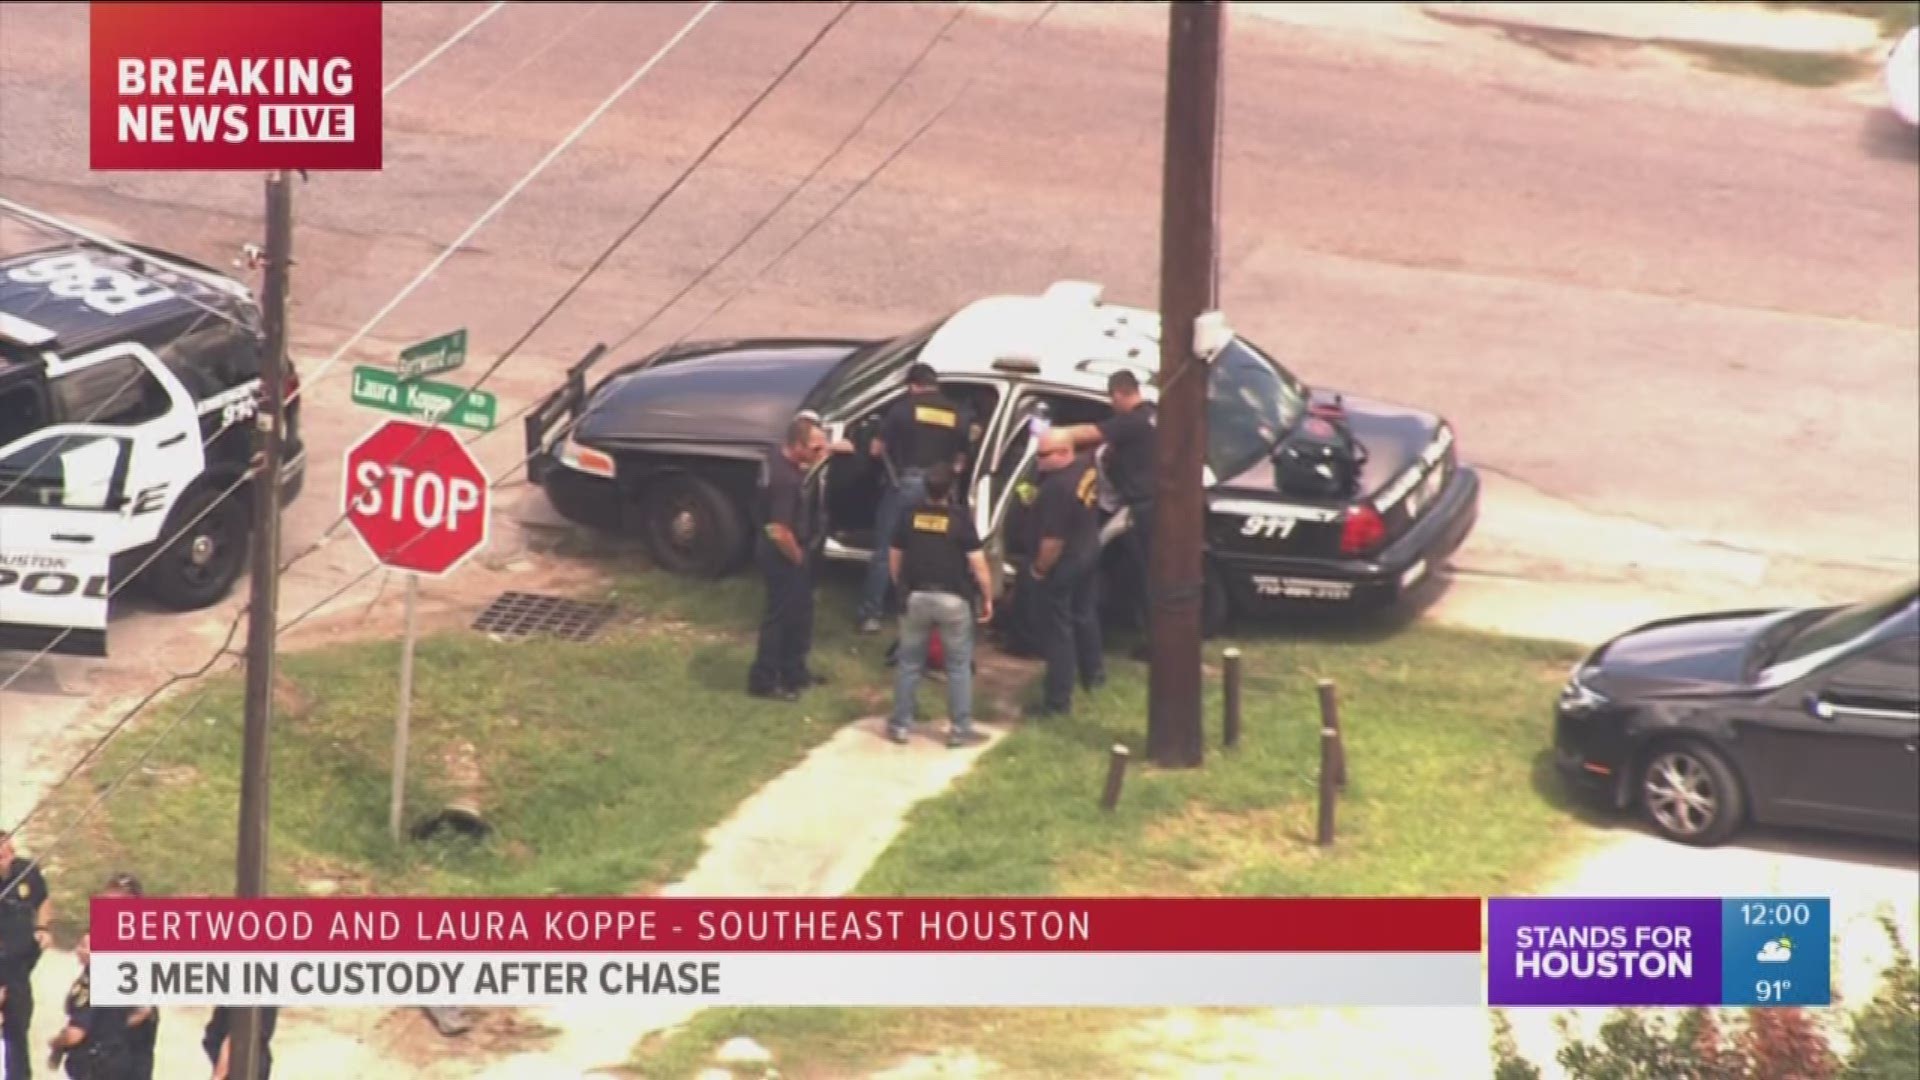 Police arrested three possible robbery suspects following a chase through northeast Houston Thursday morning.